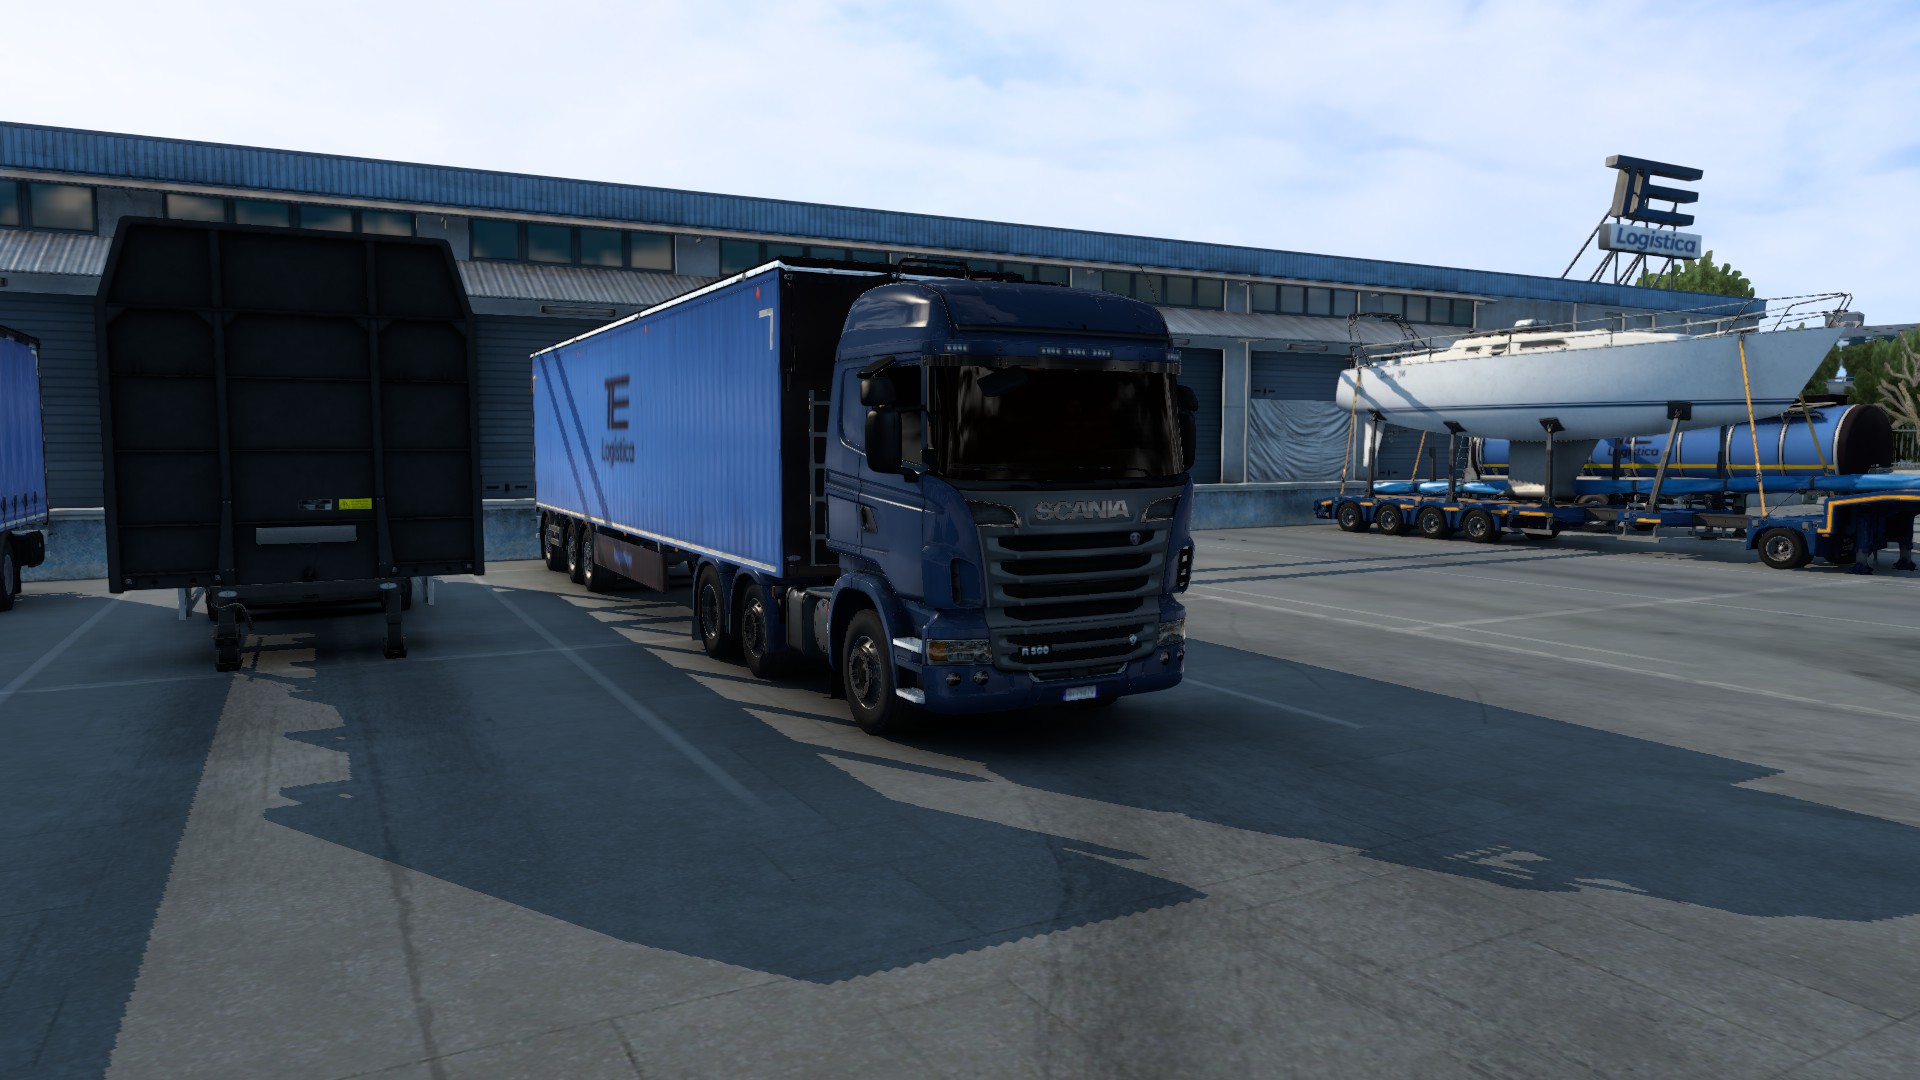 How to Download Euro Truck Simulator 2 on PC - 2023 